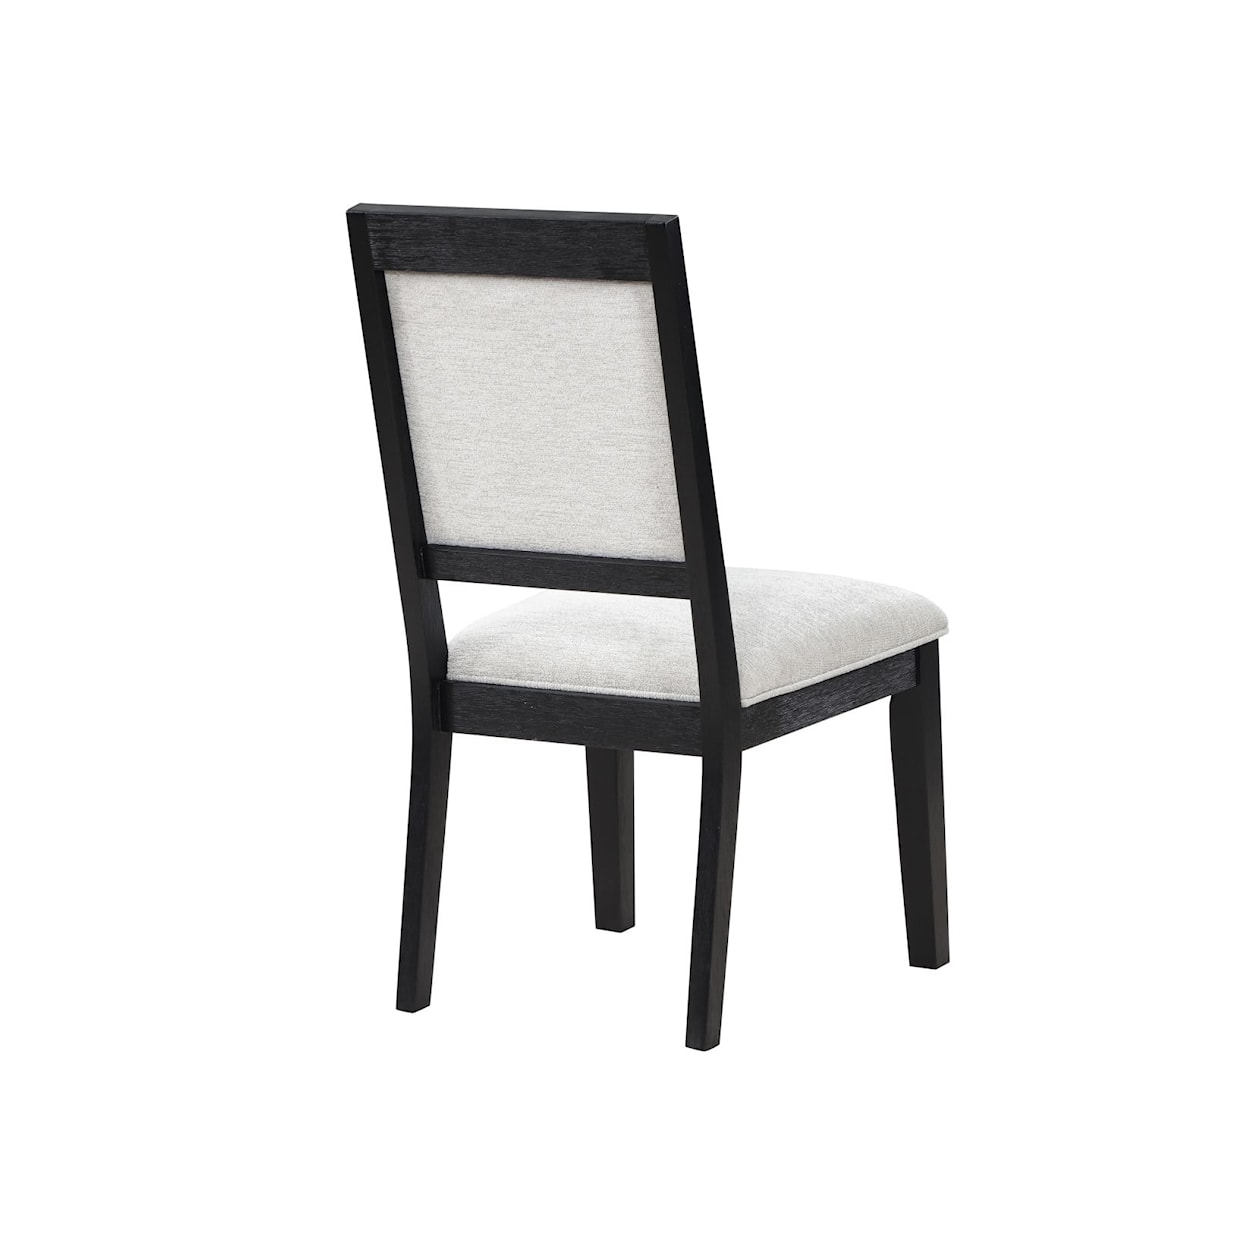 Steve Silver Molly Dining Side Chair